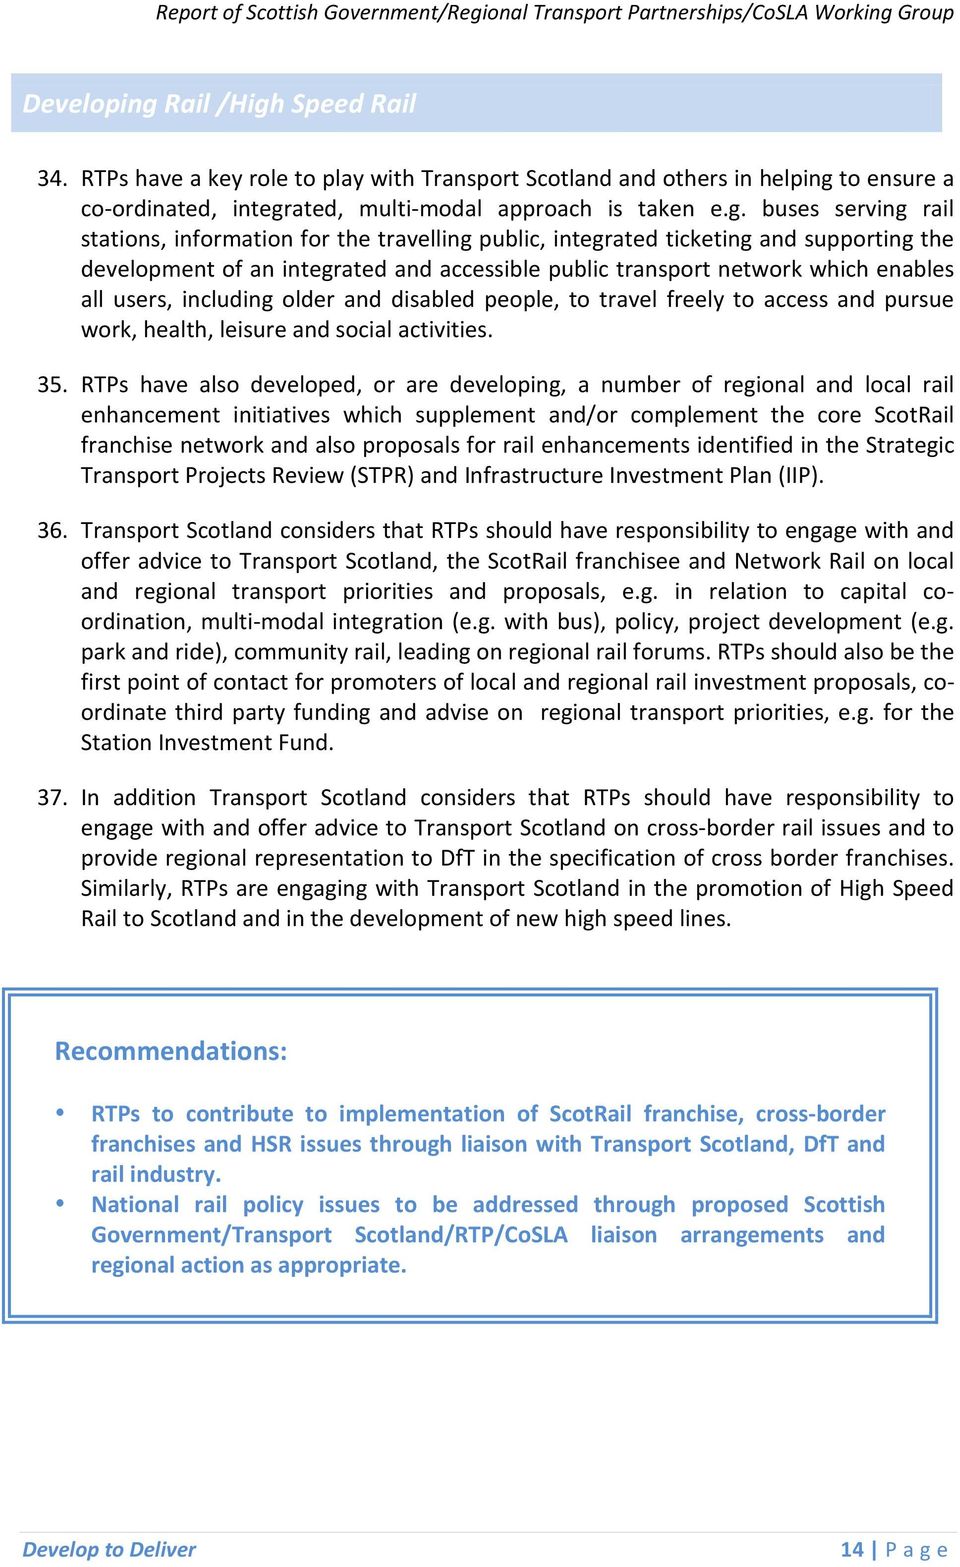 Speed Rail 34. RTPs have a key role to play with Transport Scotland and others in helping 